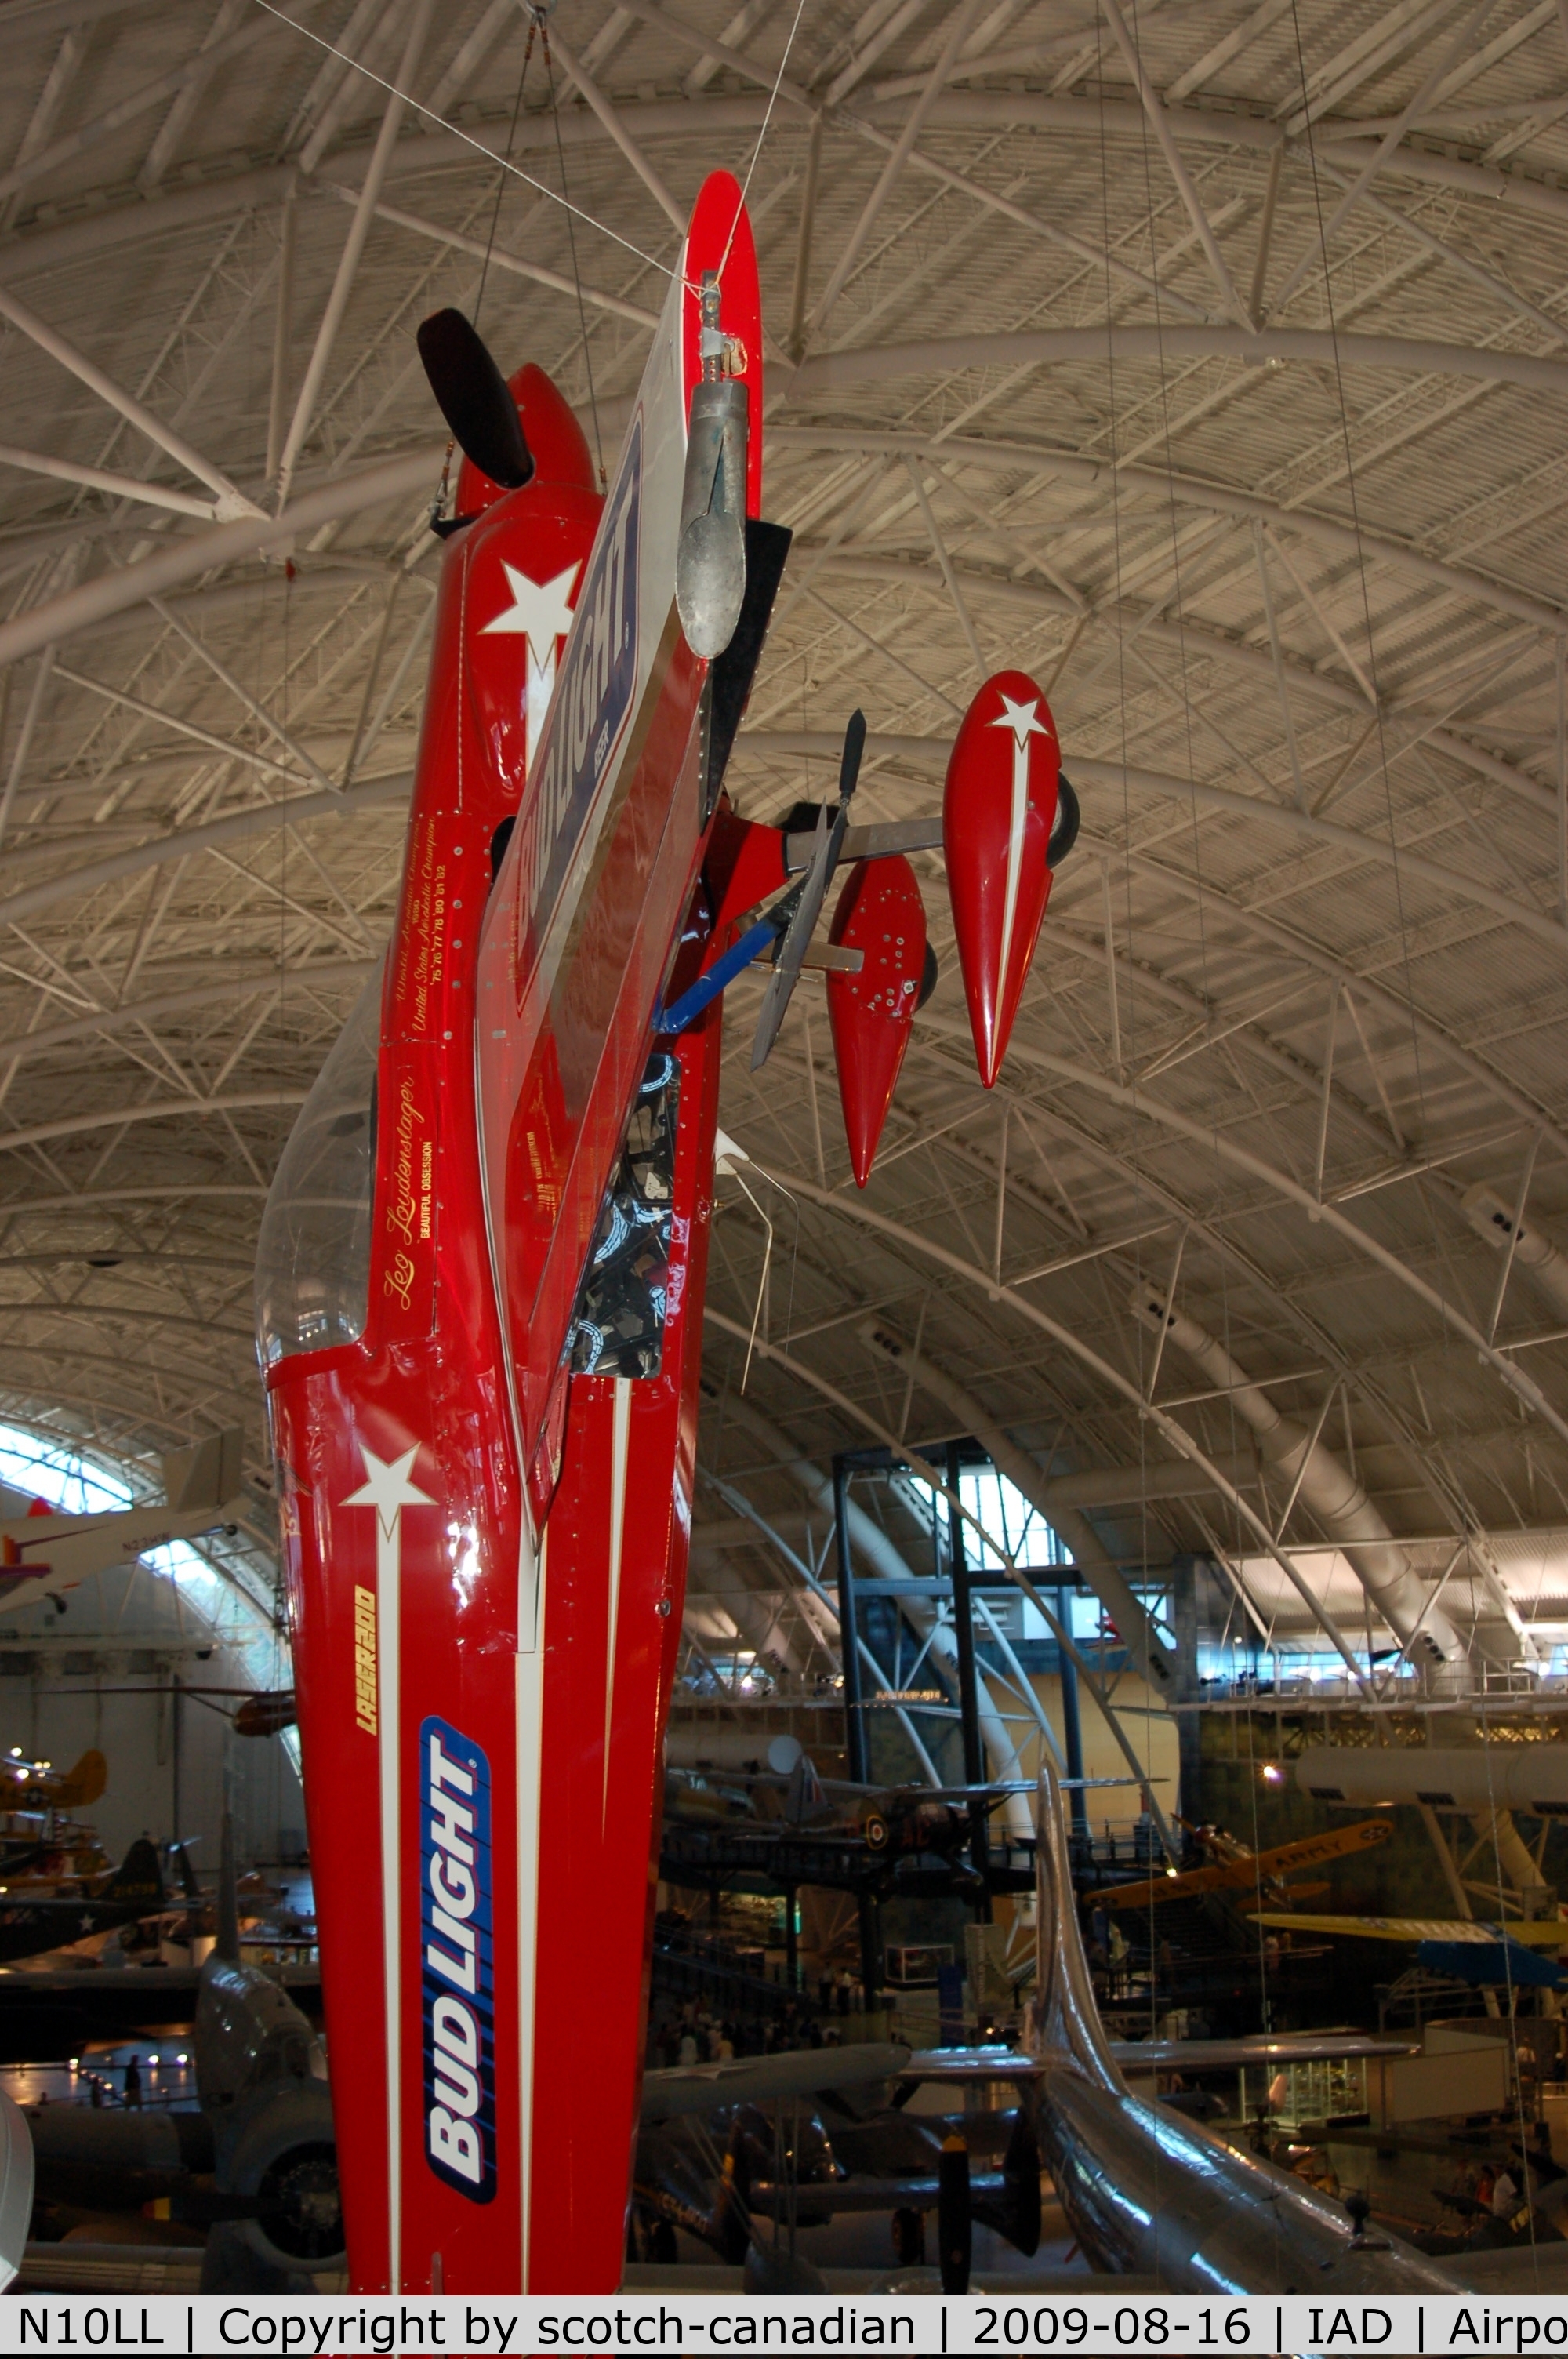 N10LL, 1971 Loudenslager STEPHENS ARKO C/N 3, Loudenslager Laser 200 Beautiful Obsession at the Steven F. Udvar-Hazy Center, Smithsonian National Air and Space Museum, Chantilly, VA